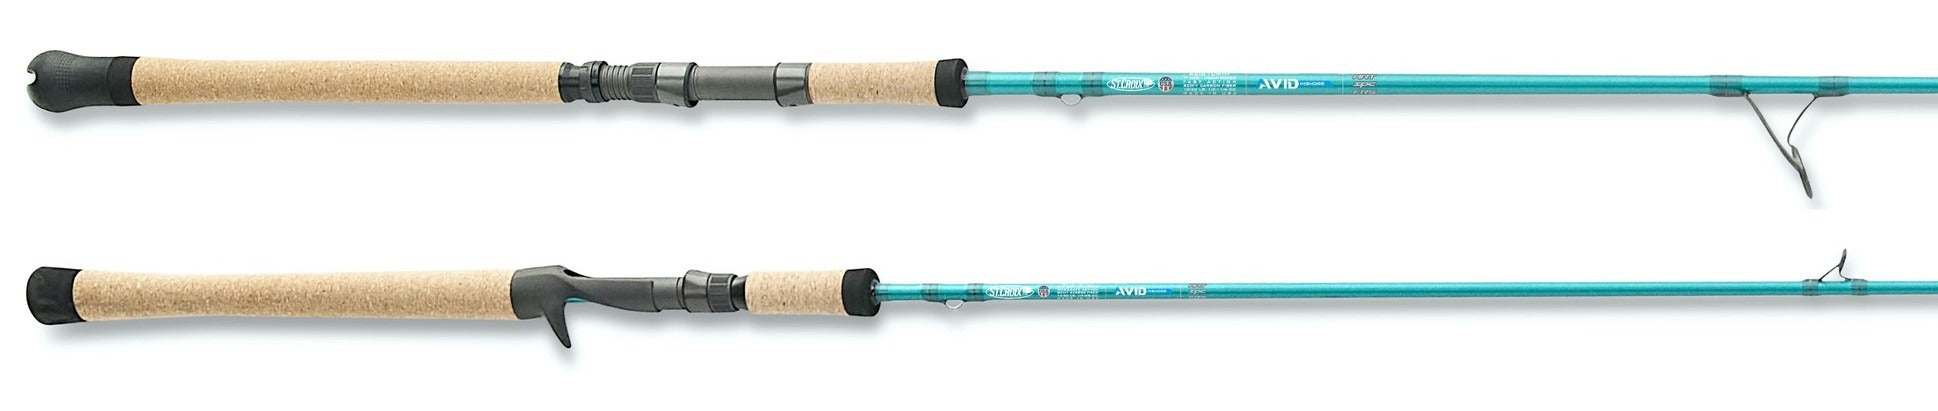 St. Croix Avid Inshore Casting Rods – Tackle World